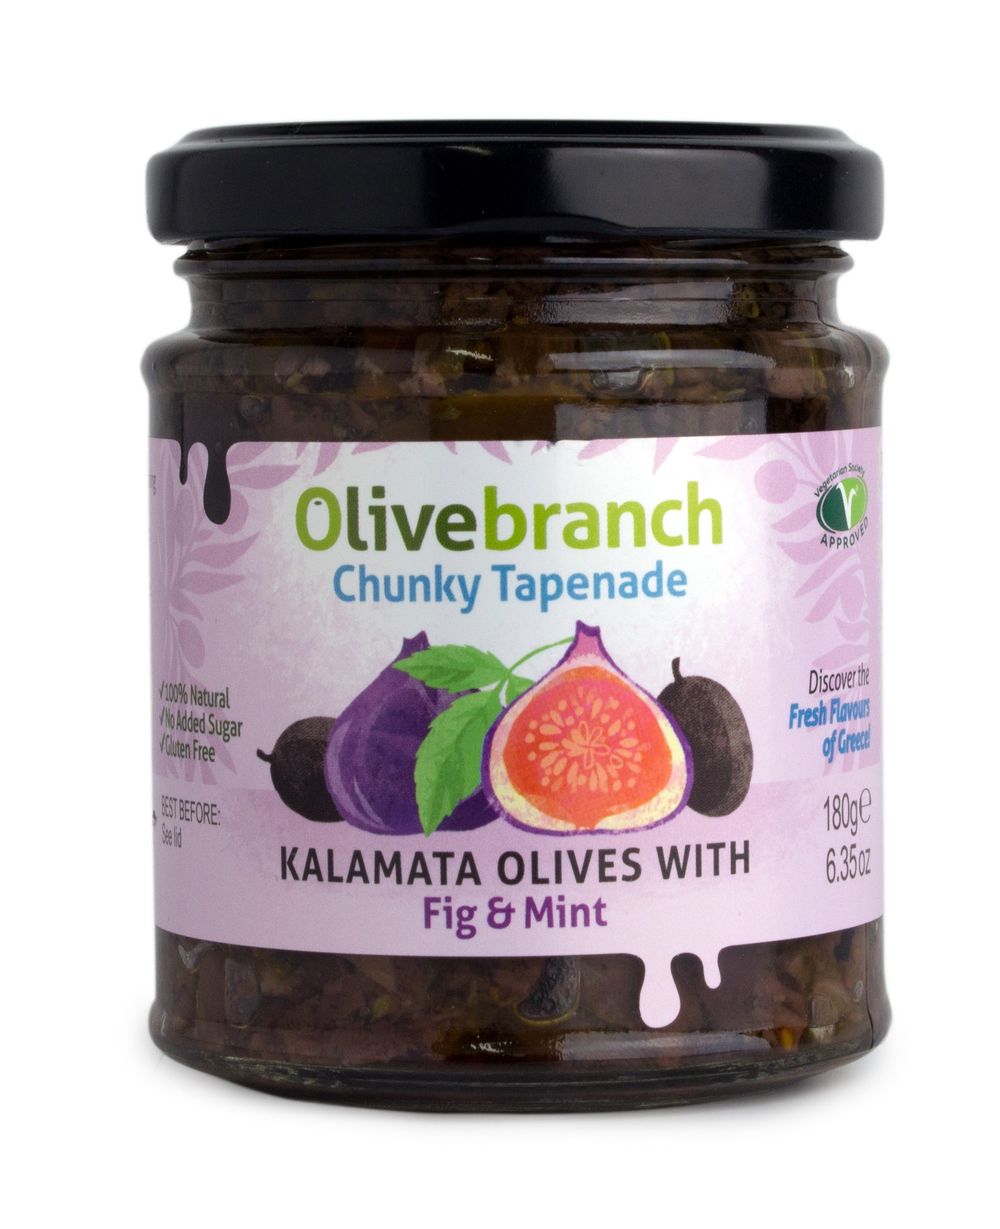 Kalamata Olive Tapenade with Fig & Mint